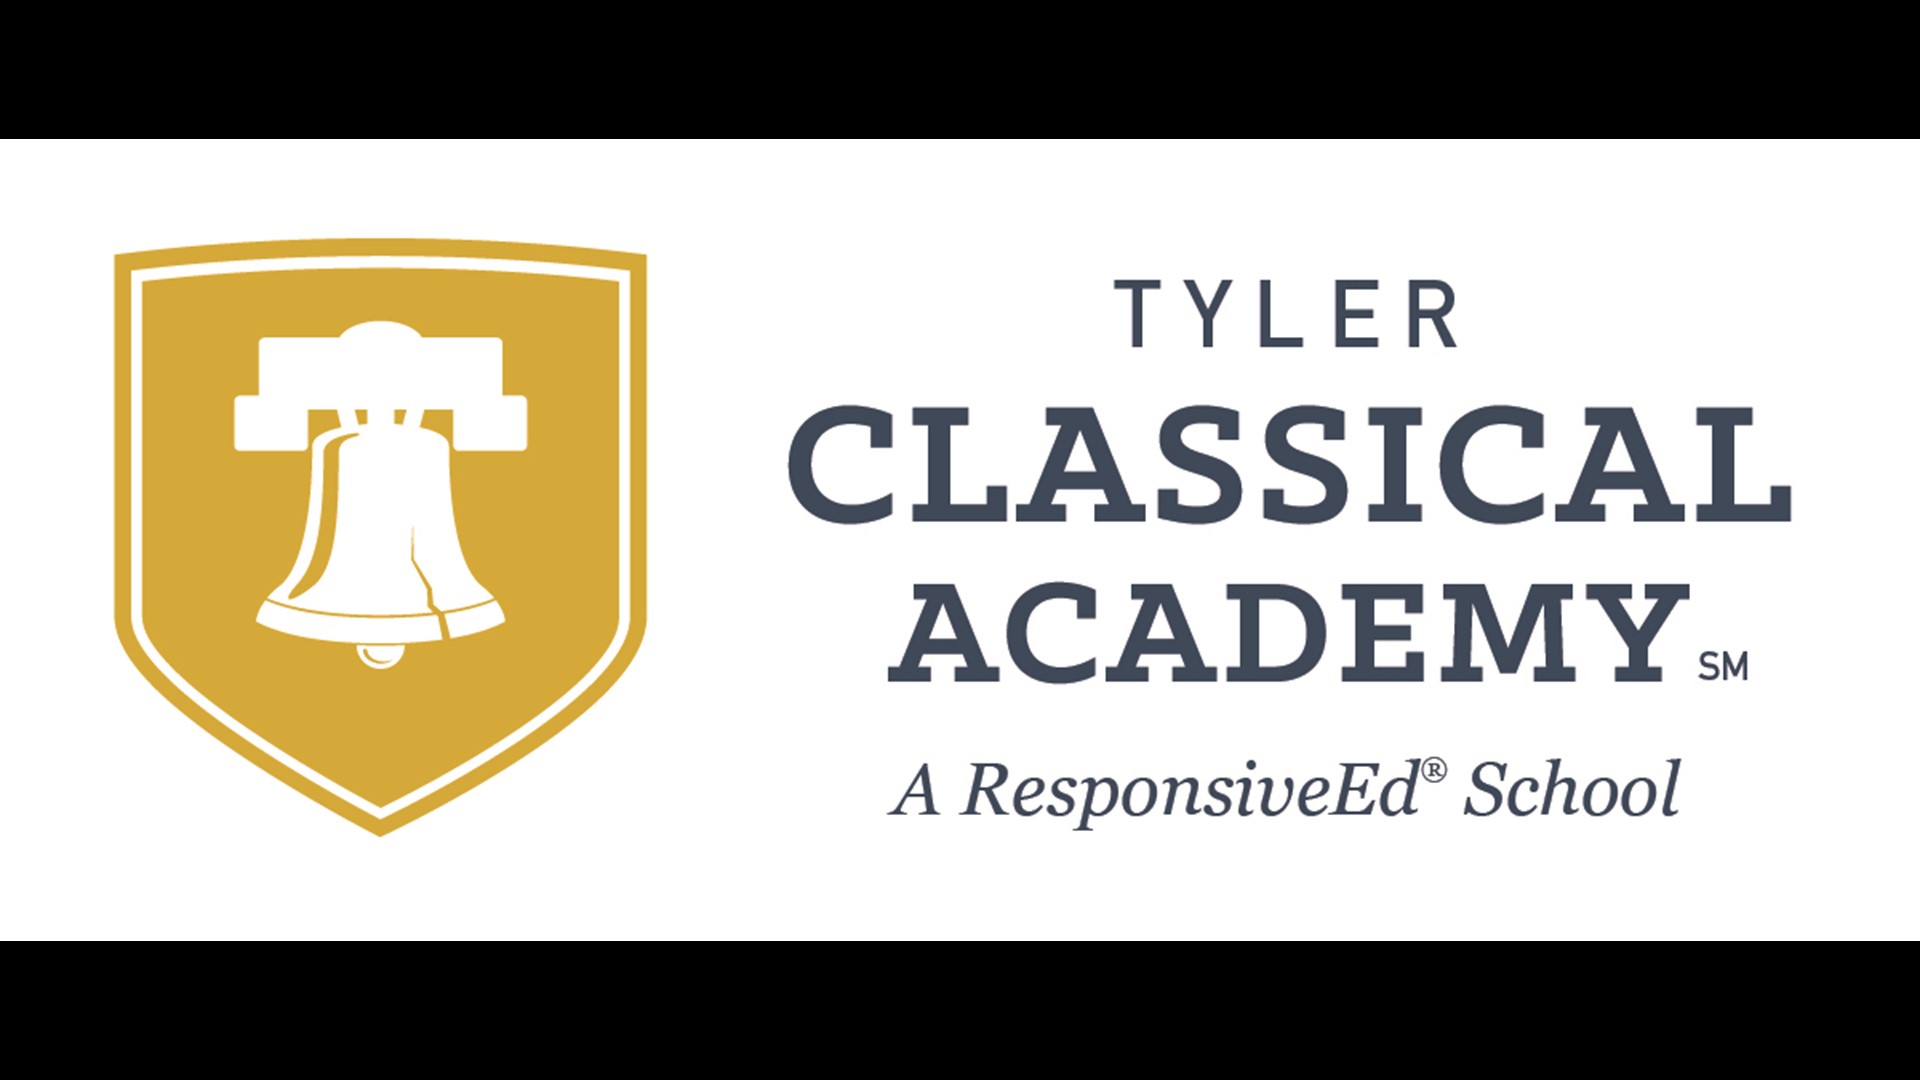 Tyler Classical Academy in Tyler is expanding.
They have big plans for the upcoming 2019-2020 school year.
Now more East Texas students will be able to experience a true classical education.